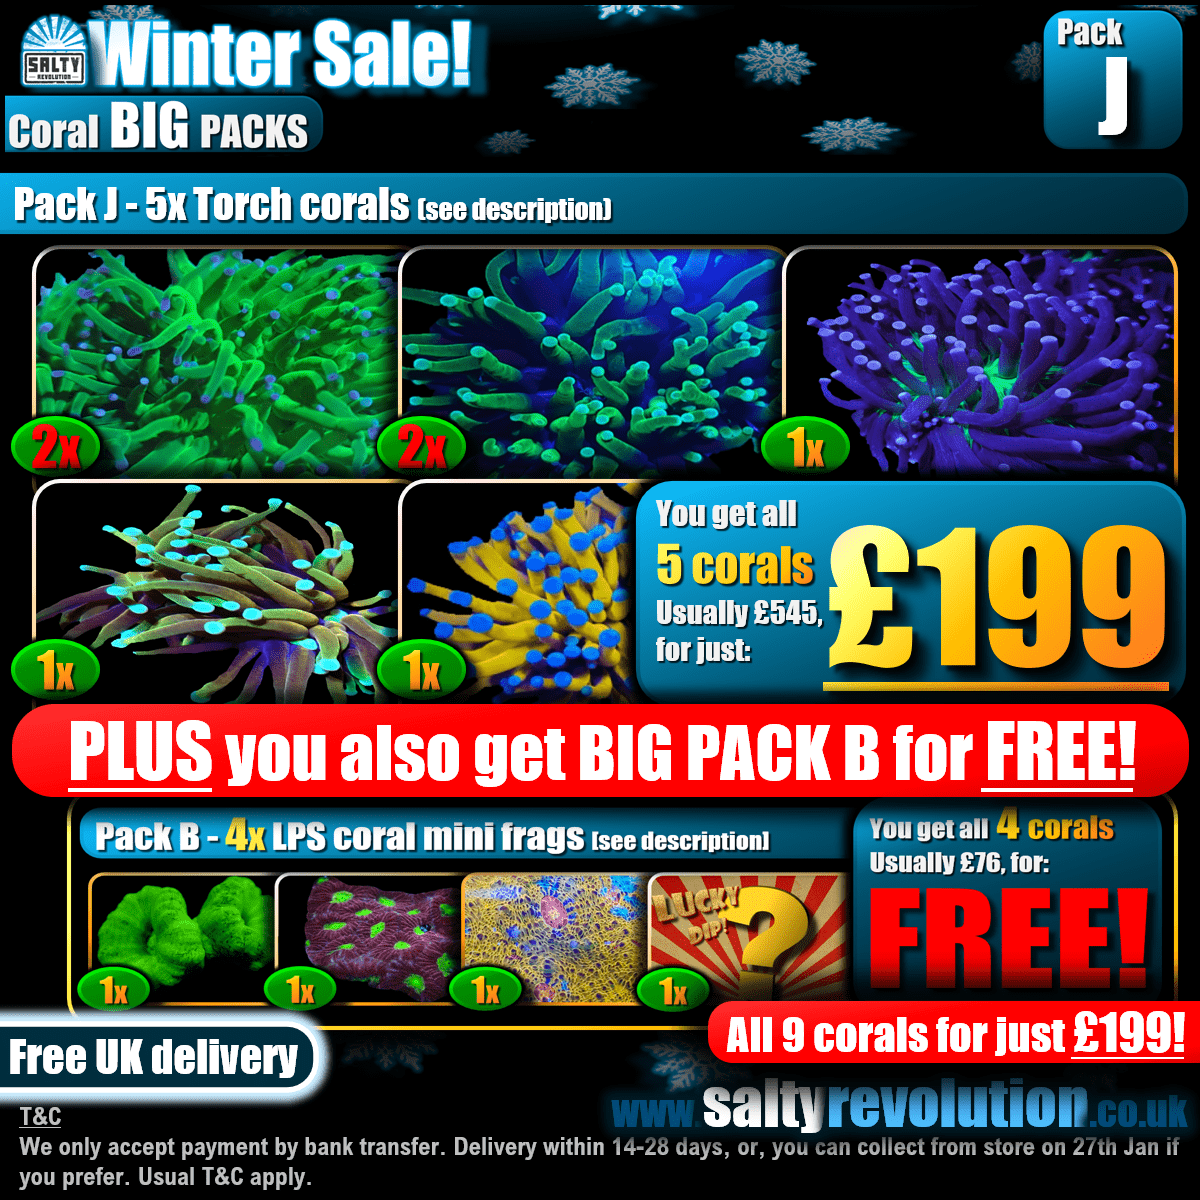 Winter Sale - BIG PACKS - Pack J - £199 - Only 3 of these packs available!